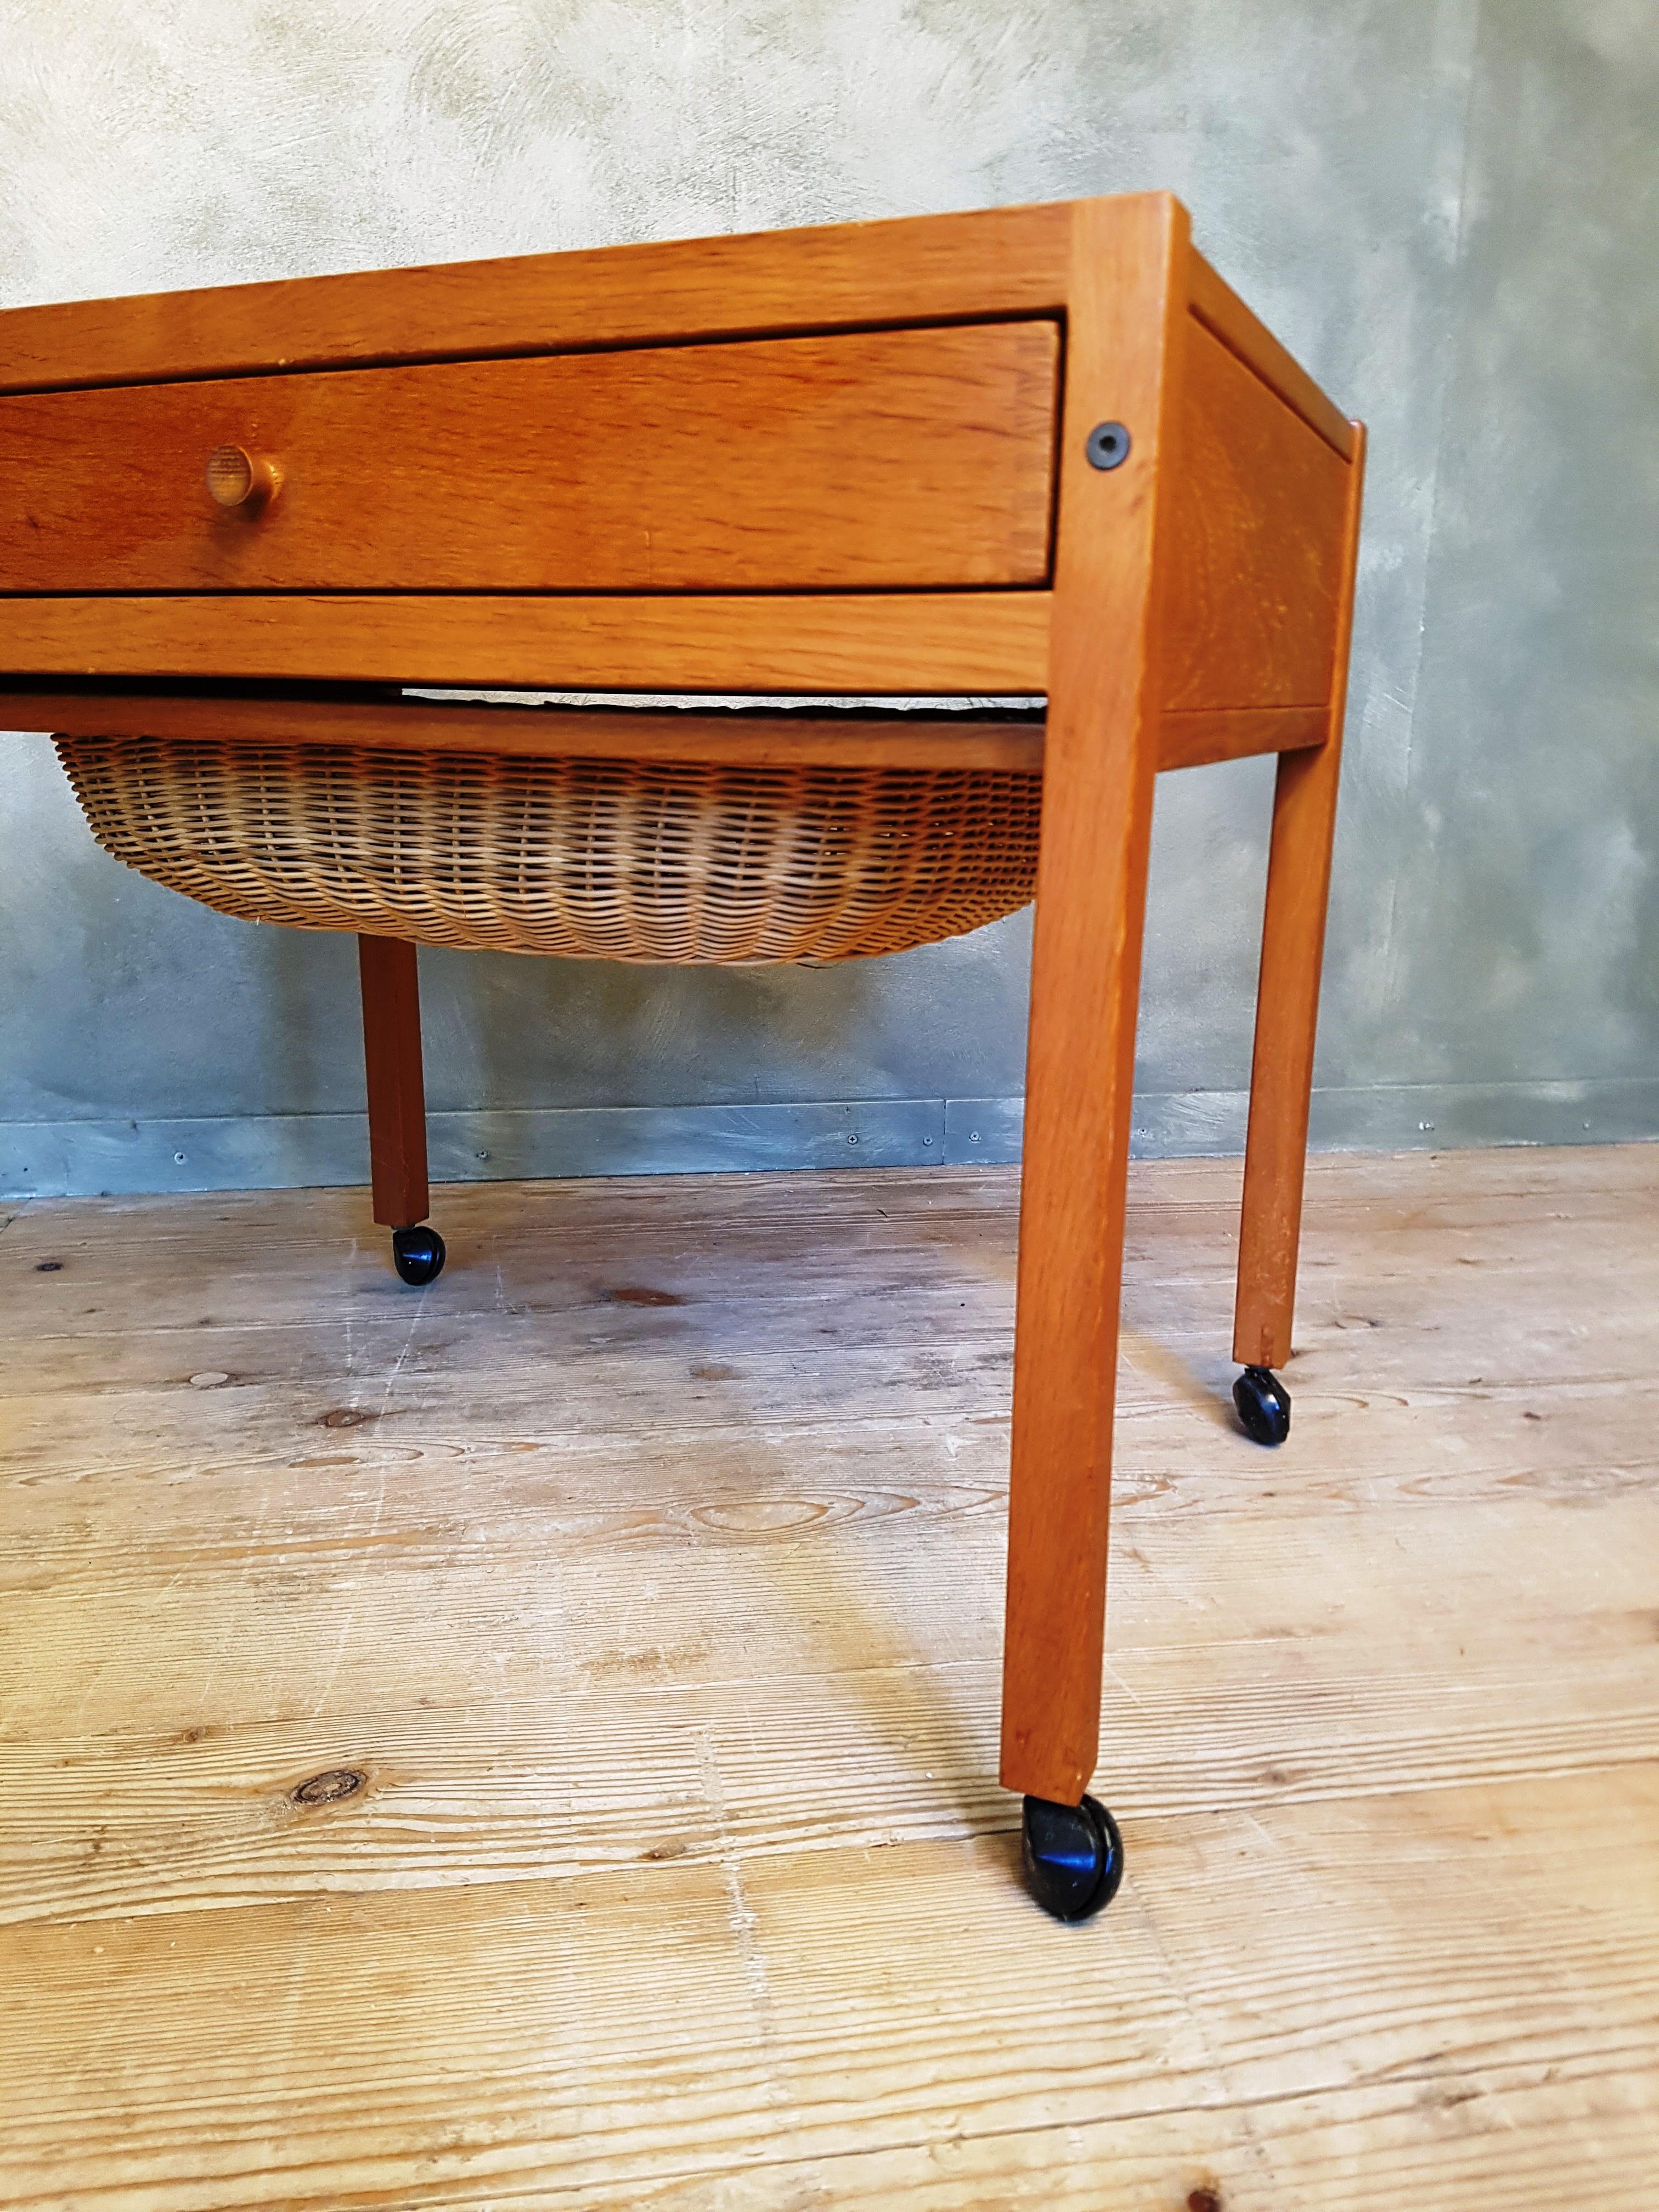 Sewing table or trolley with large drawer and pull-out rattan basket on wheels. A piece of craftsmanship in the Danish Modern style of the 1960s. Despite its size, the table looks light and delicate. The model is reminiscent of the sewing table by